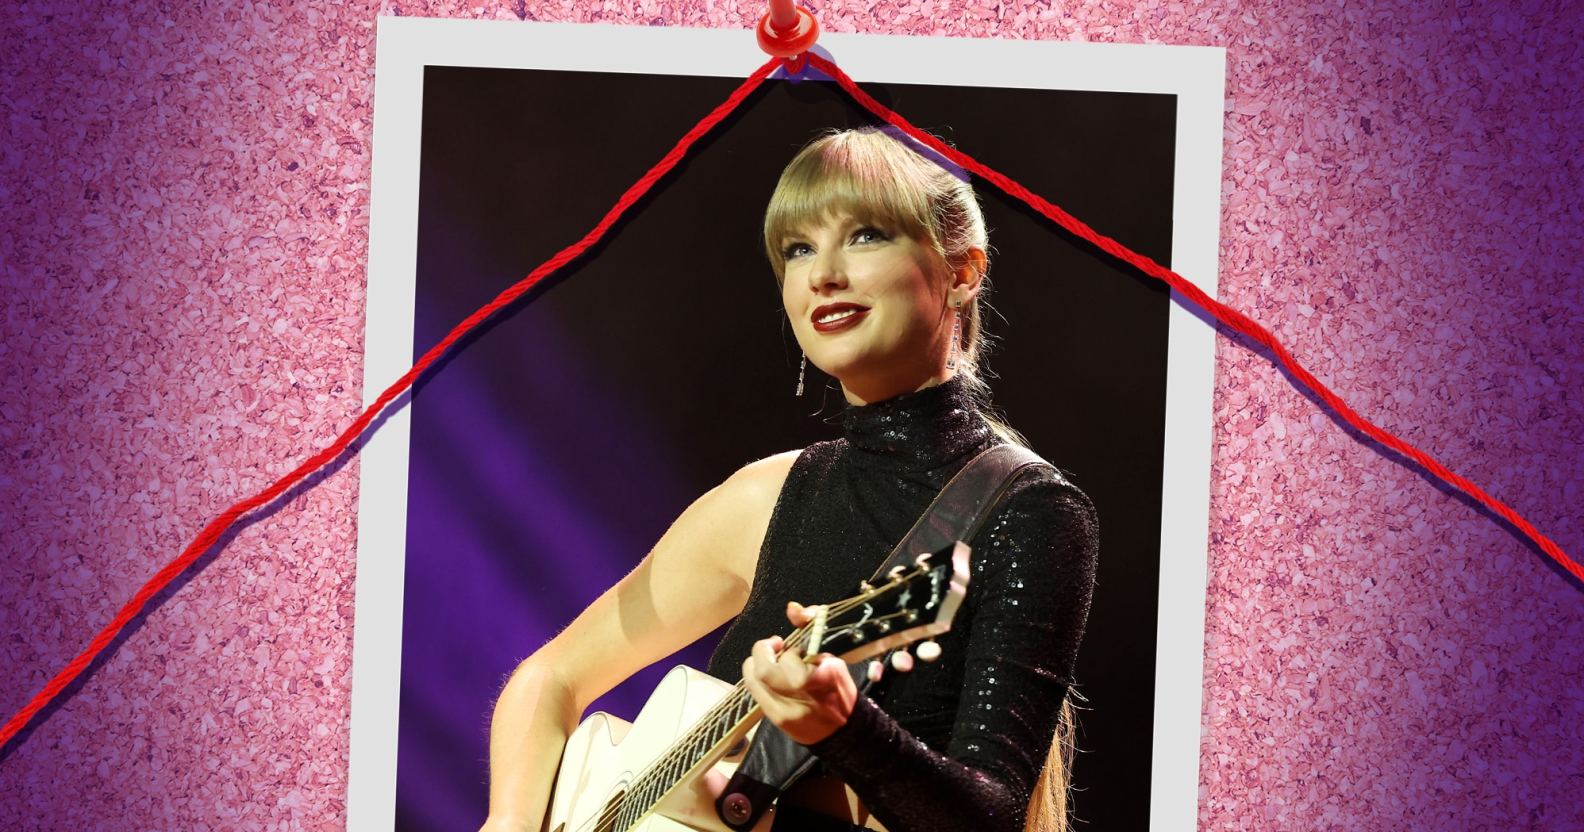 Taylor Swift performing live on an edited background.